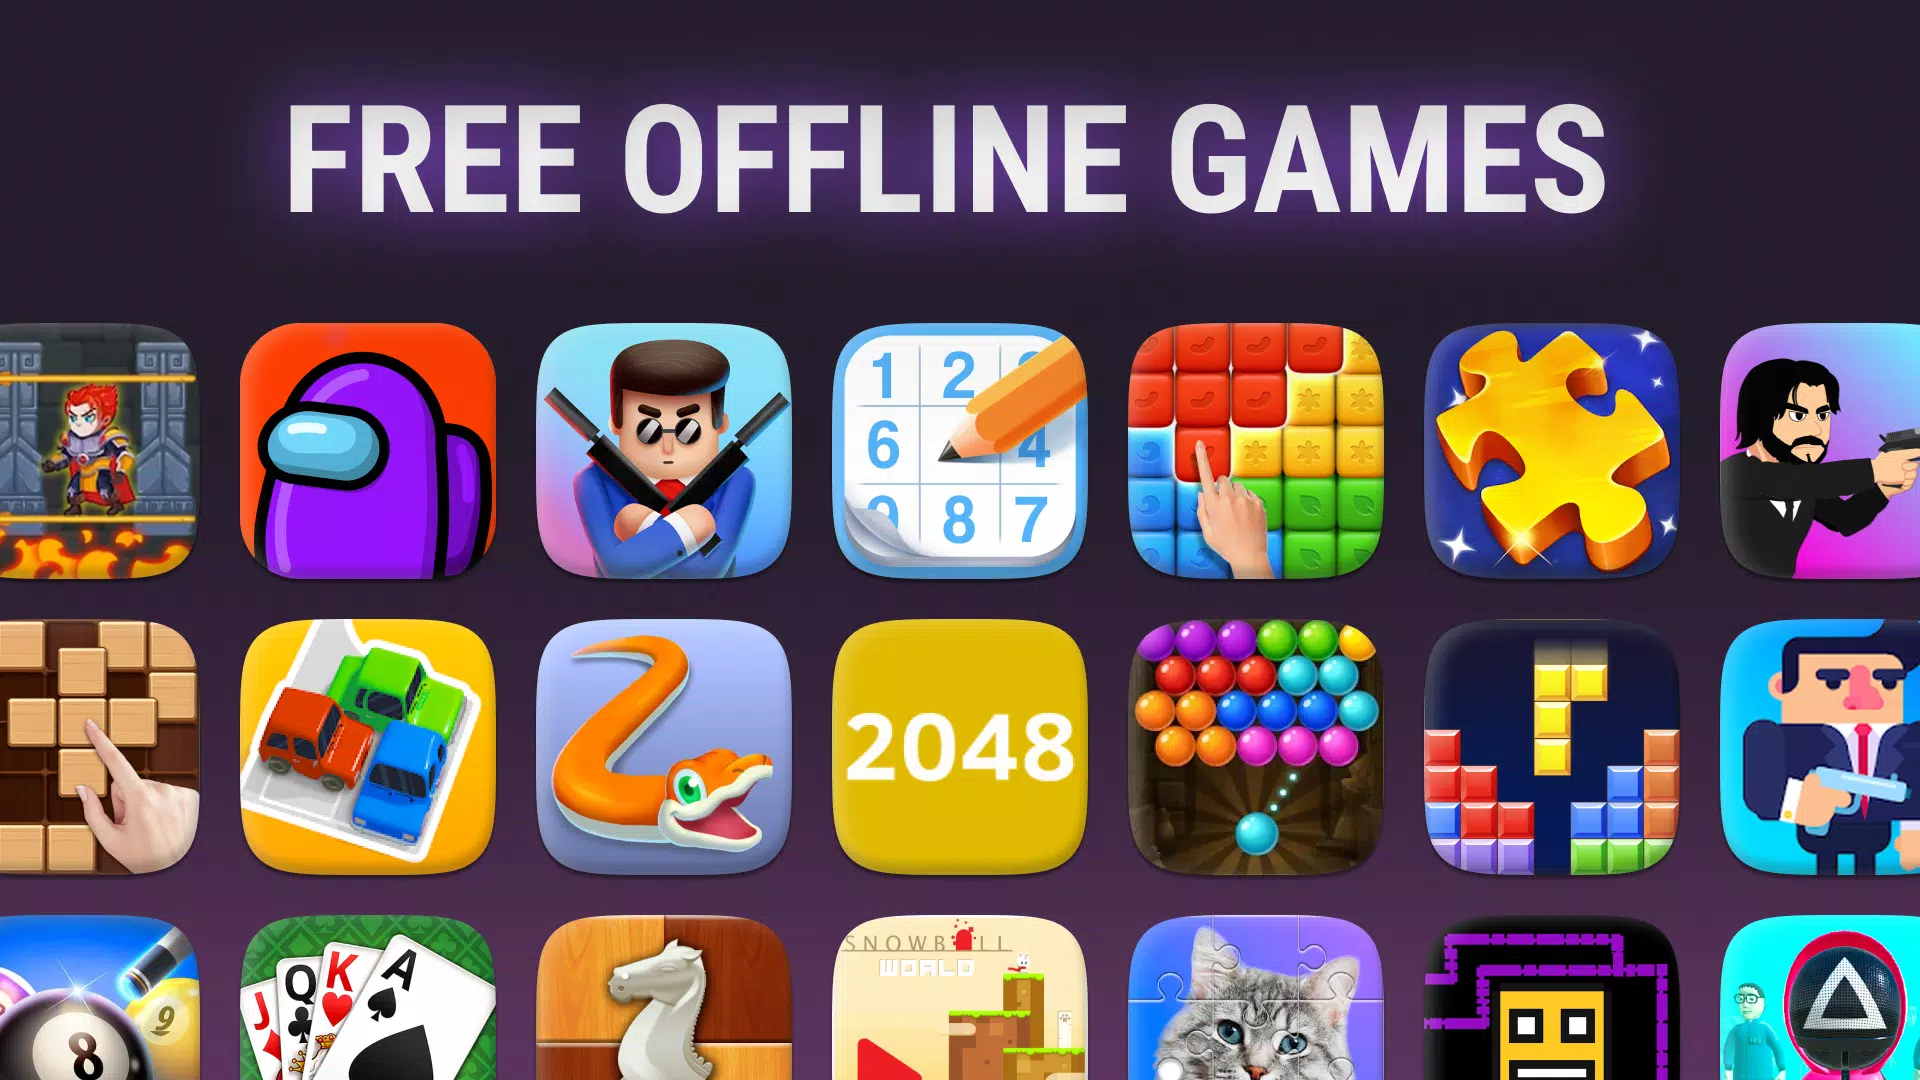 How To Use 2 Player Games Challenge App, Offline Gaming App